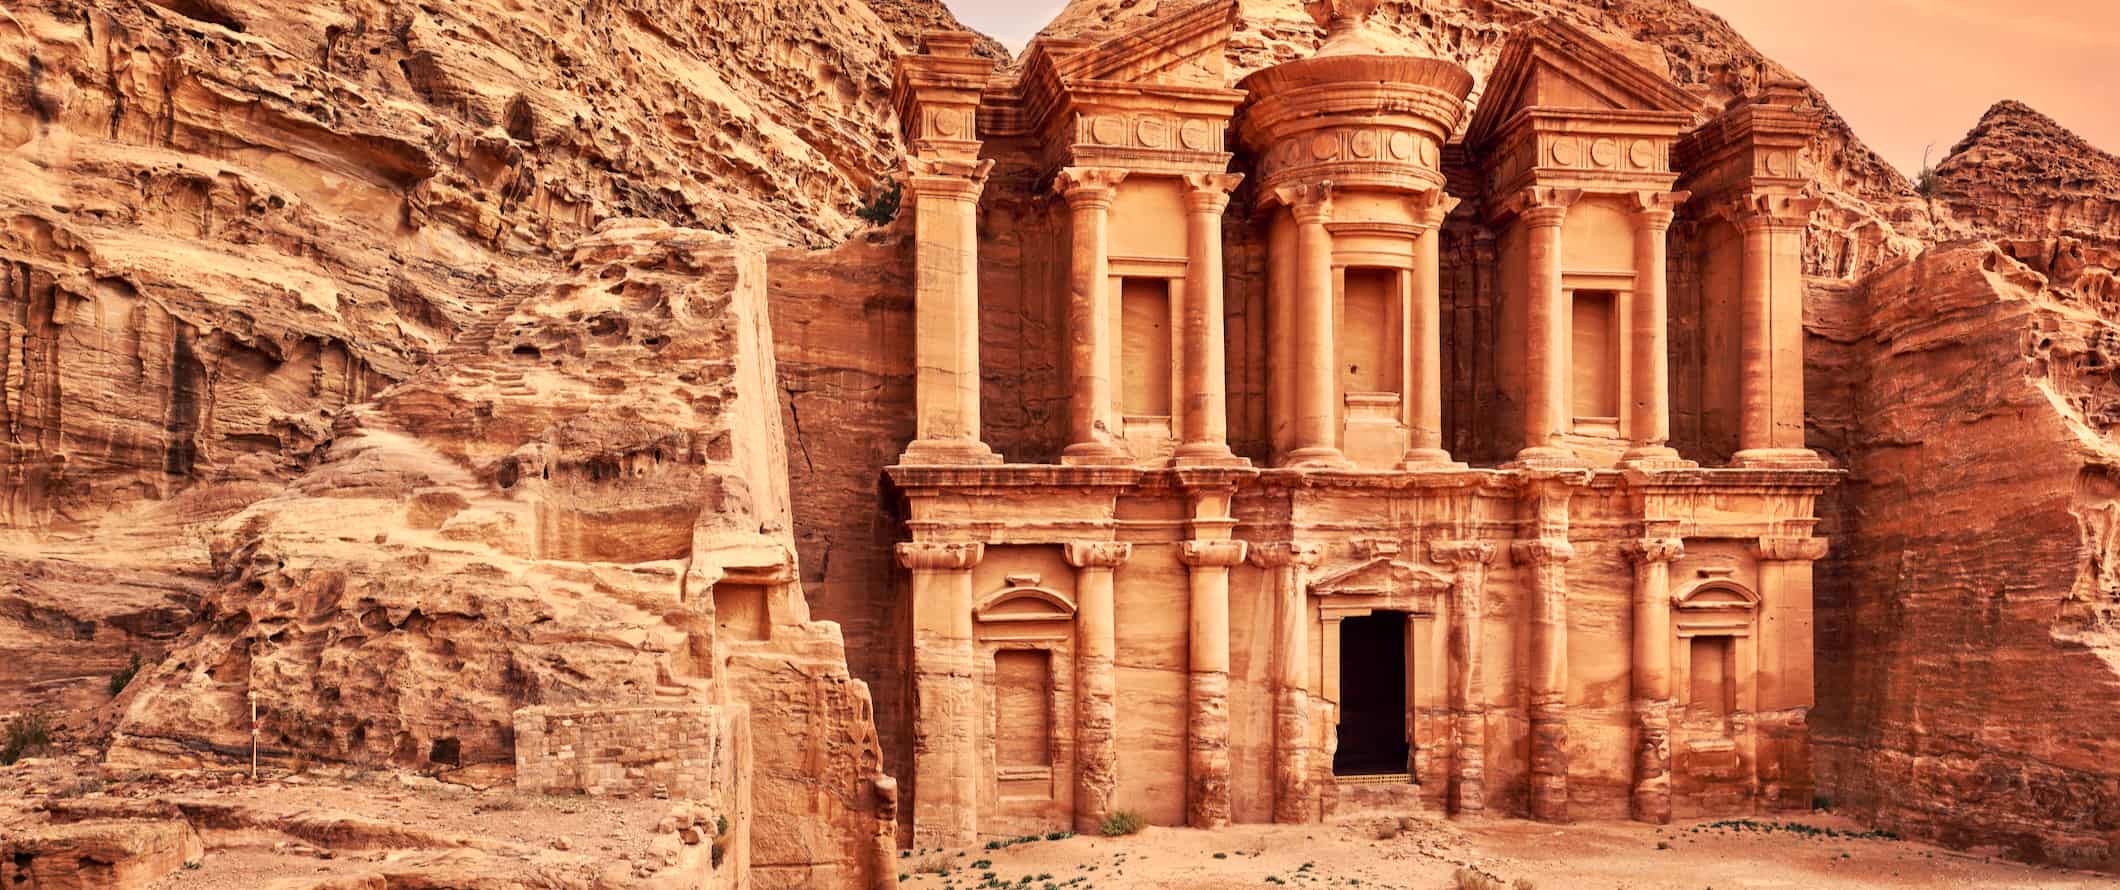 The famous facade of Petra, a Wonder of the World in Jordan